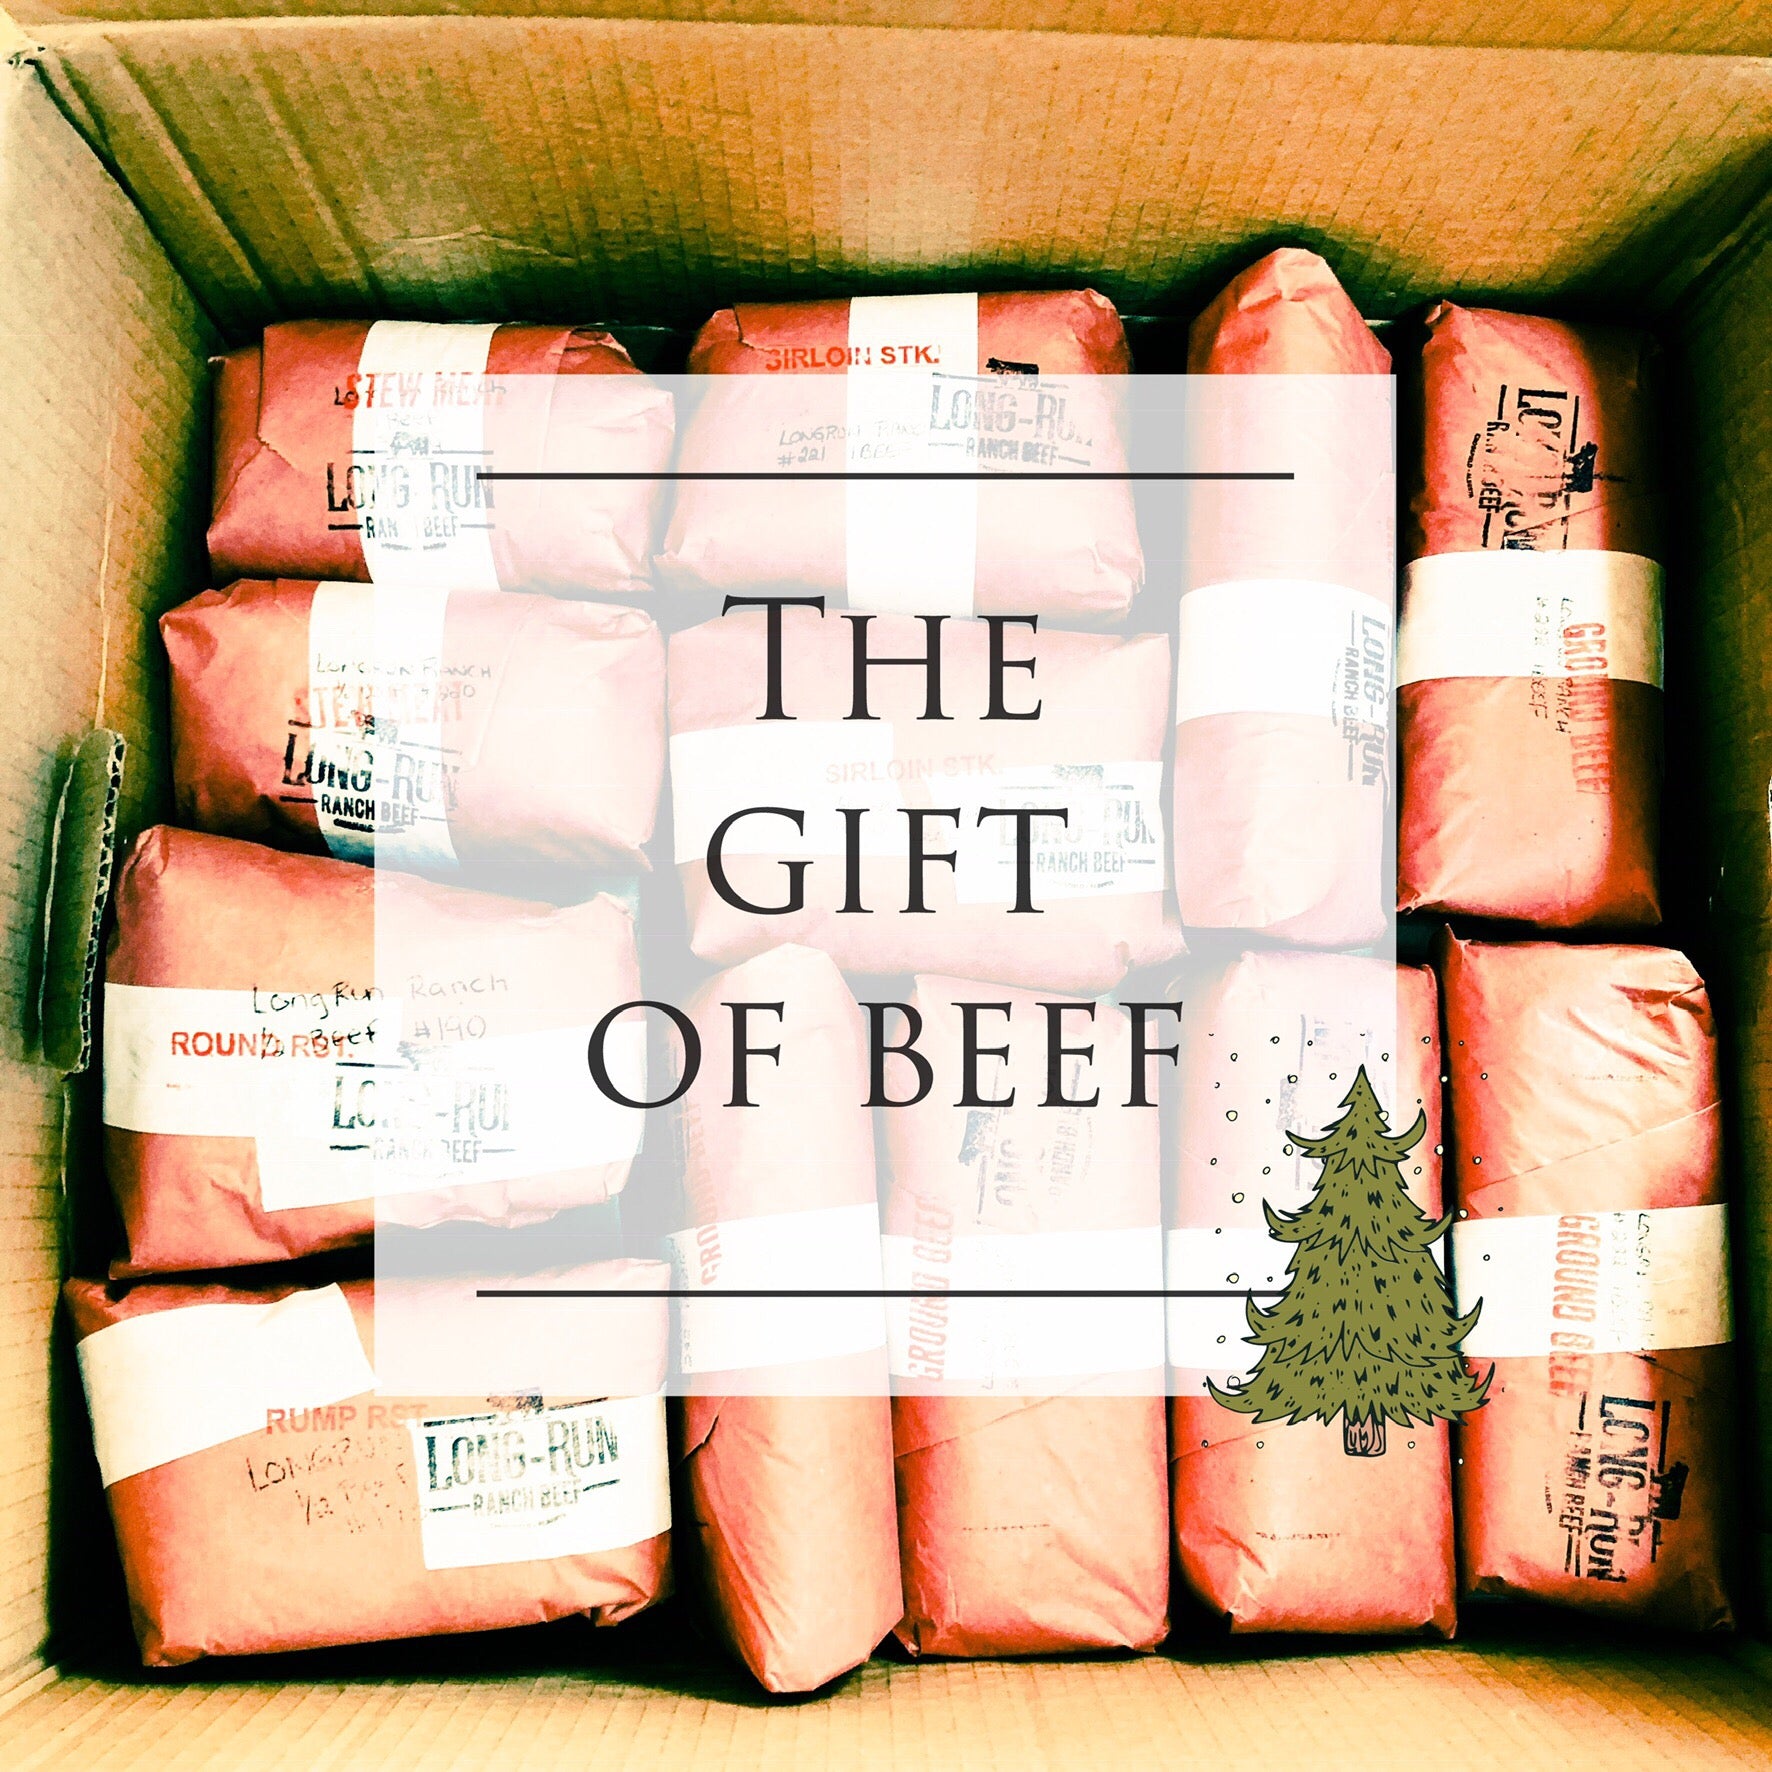 The Gift of Beef